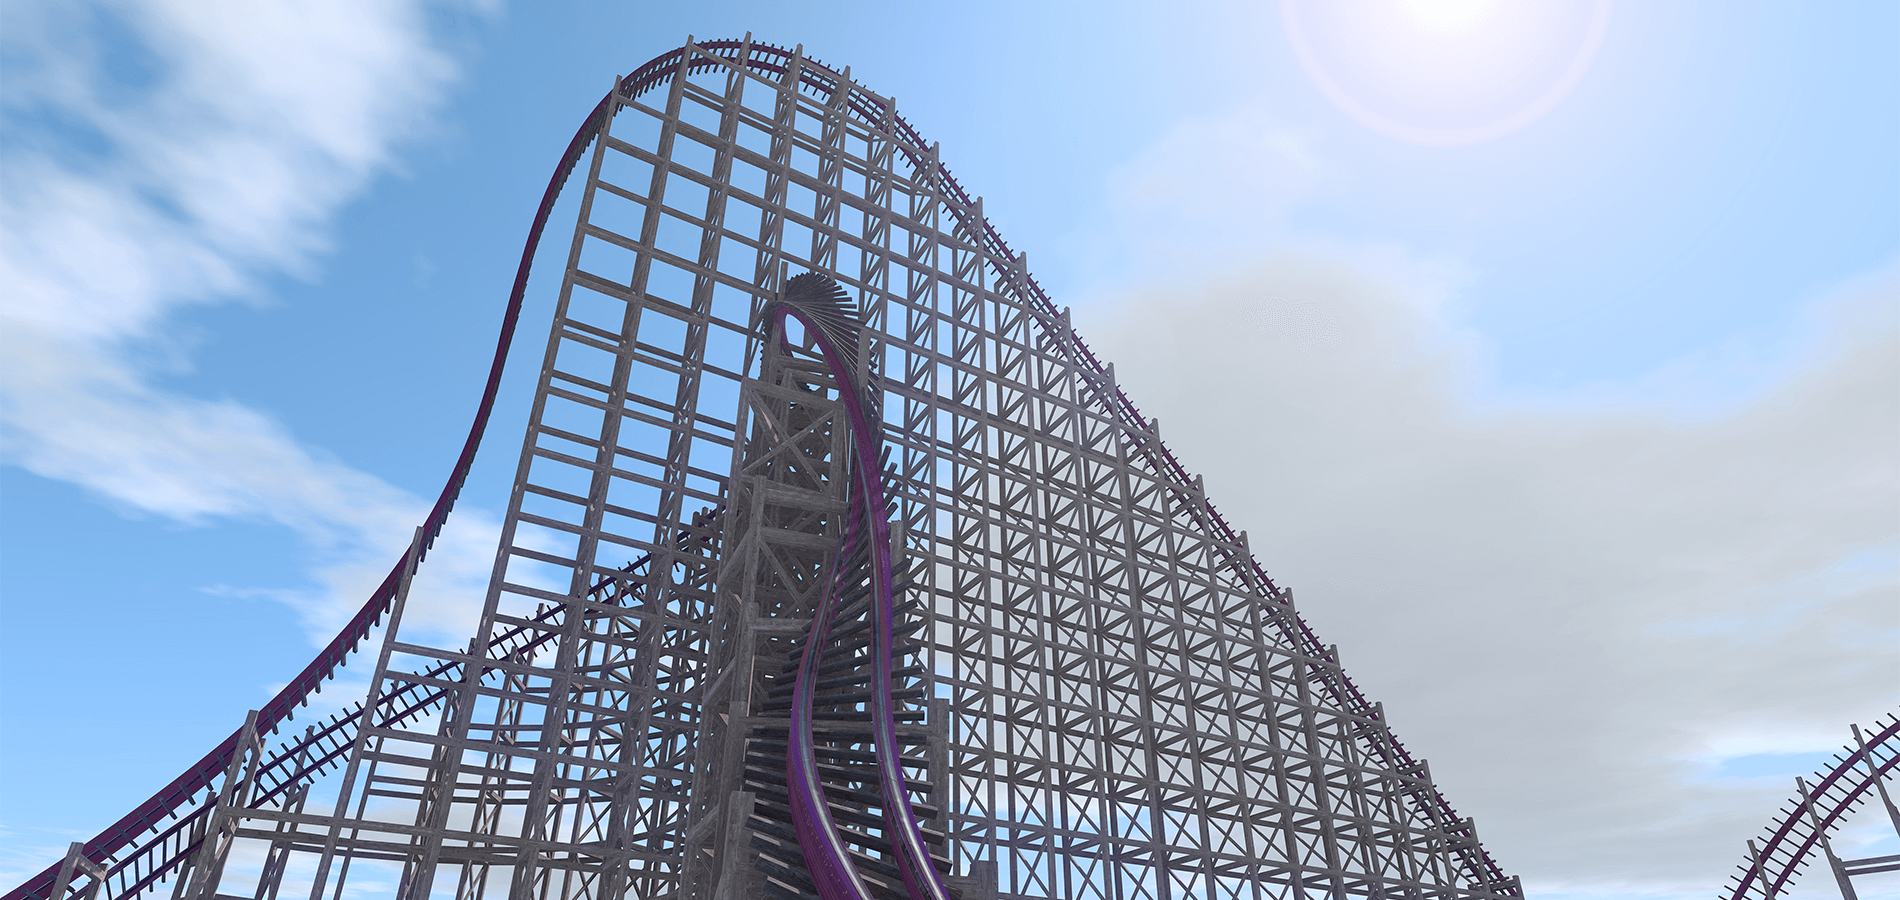 Insane Record Breaking Hybrid Coaster Is Coming To Busch Gardens